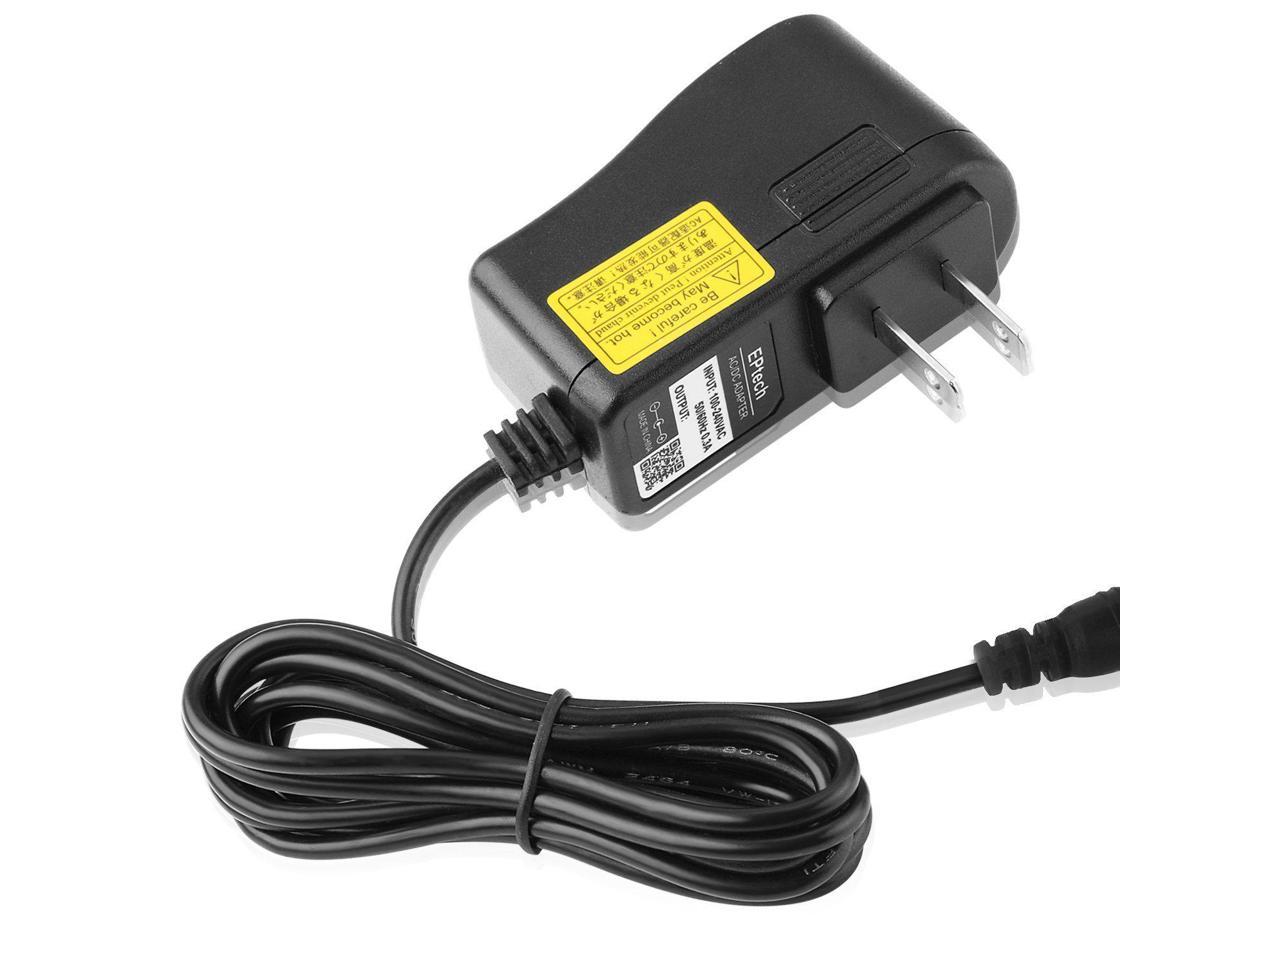 AC DC Adapter Power Supply Cord for Singer Model DKKPIA Quikfix Mending Sewing Machine